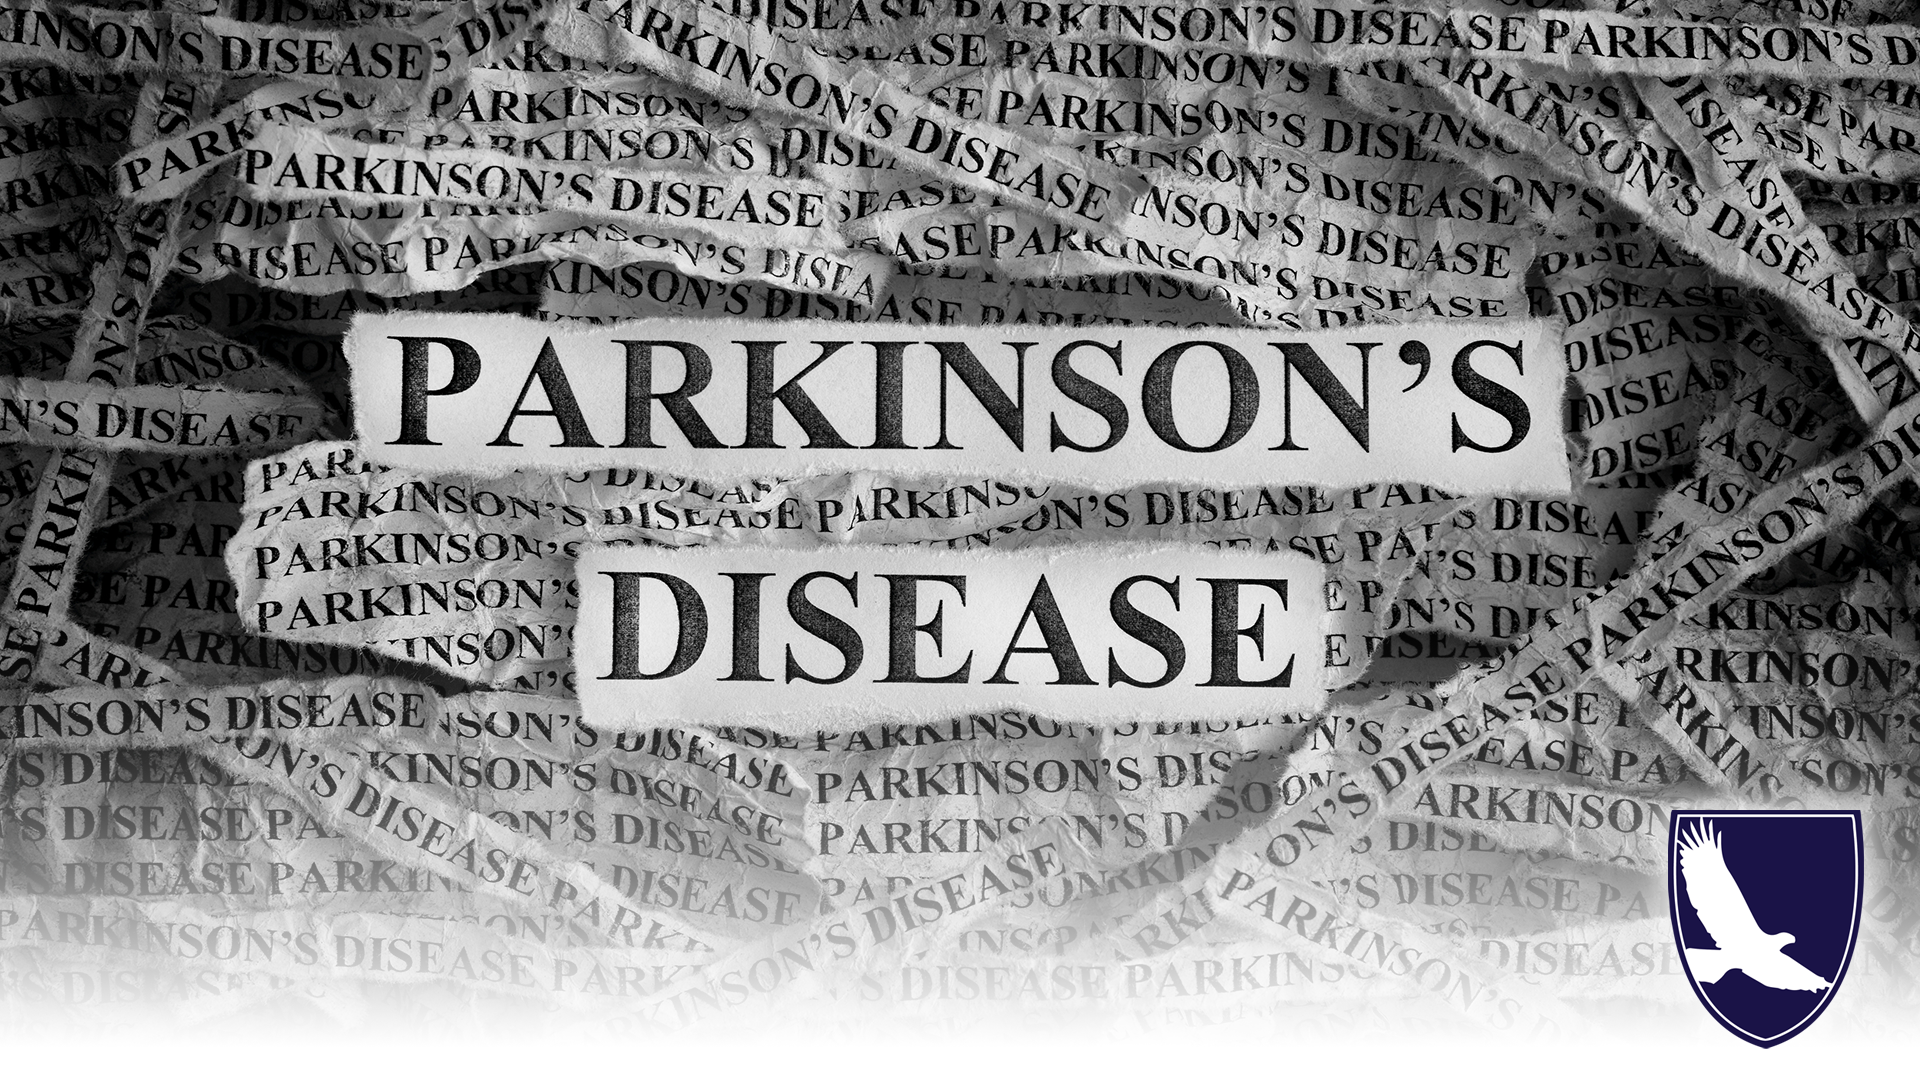 CAN I GET SOCIAL SECURITY DISABILITY FOR PARKINSON’S DISEASE